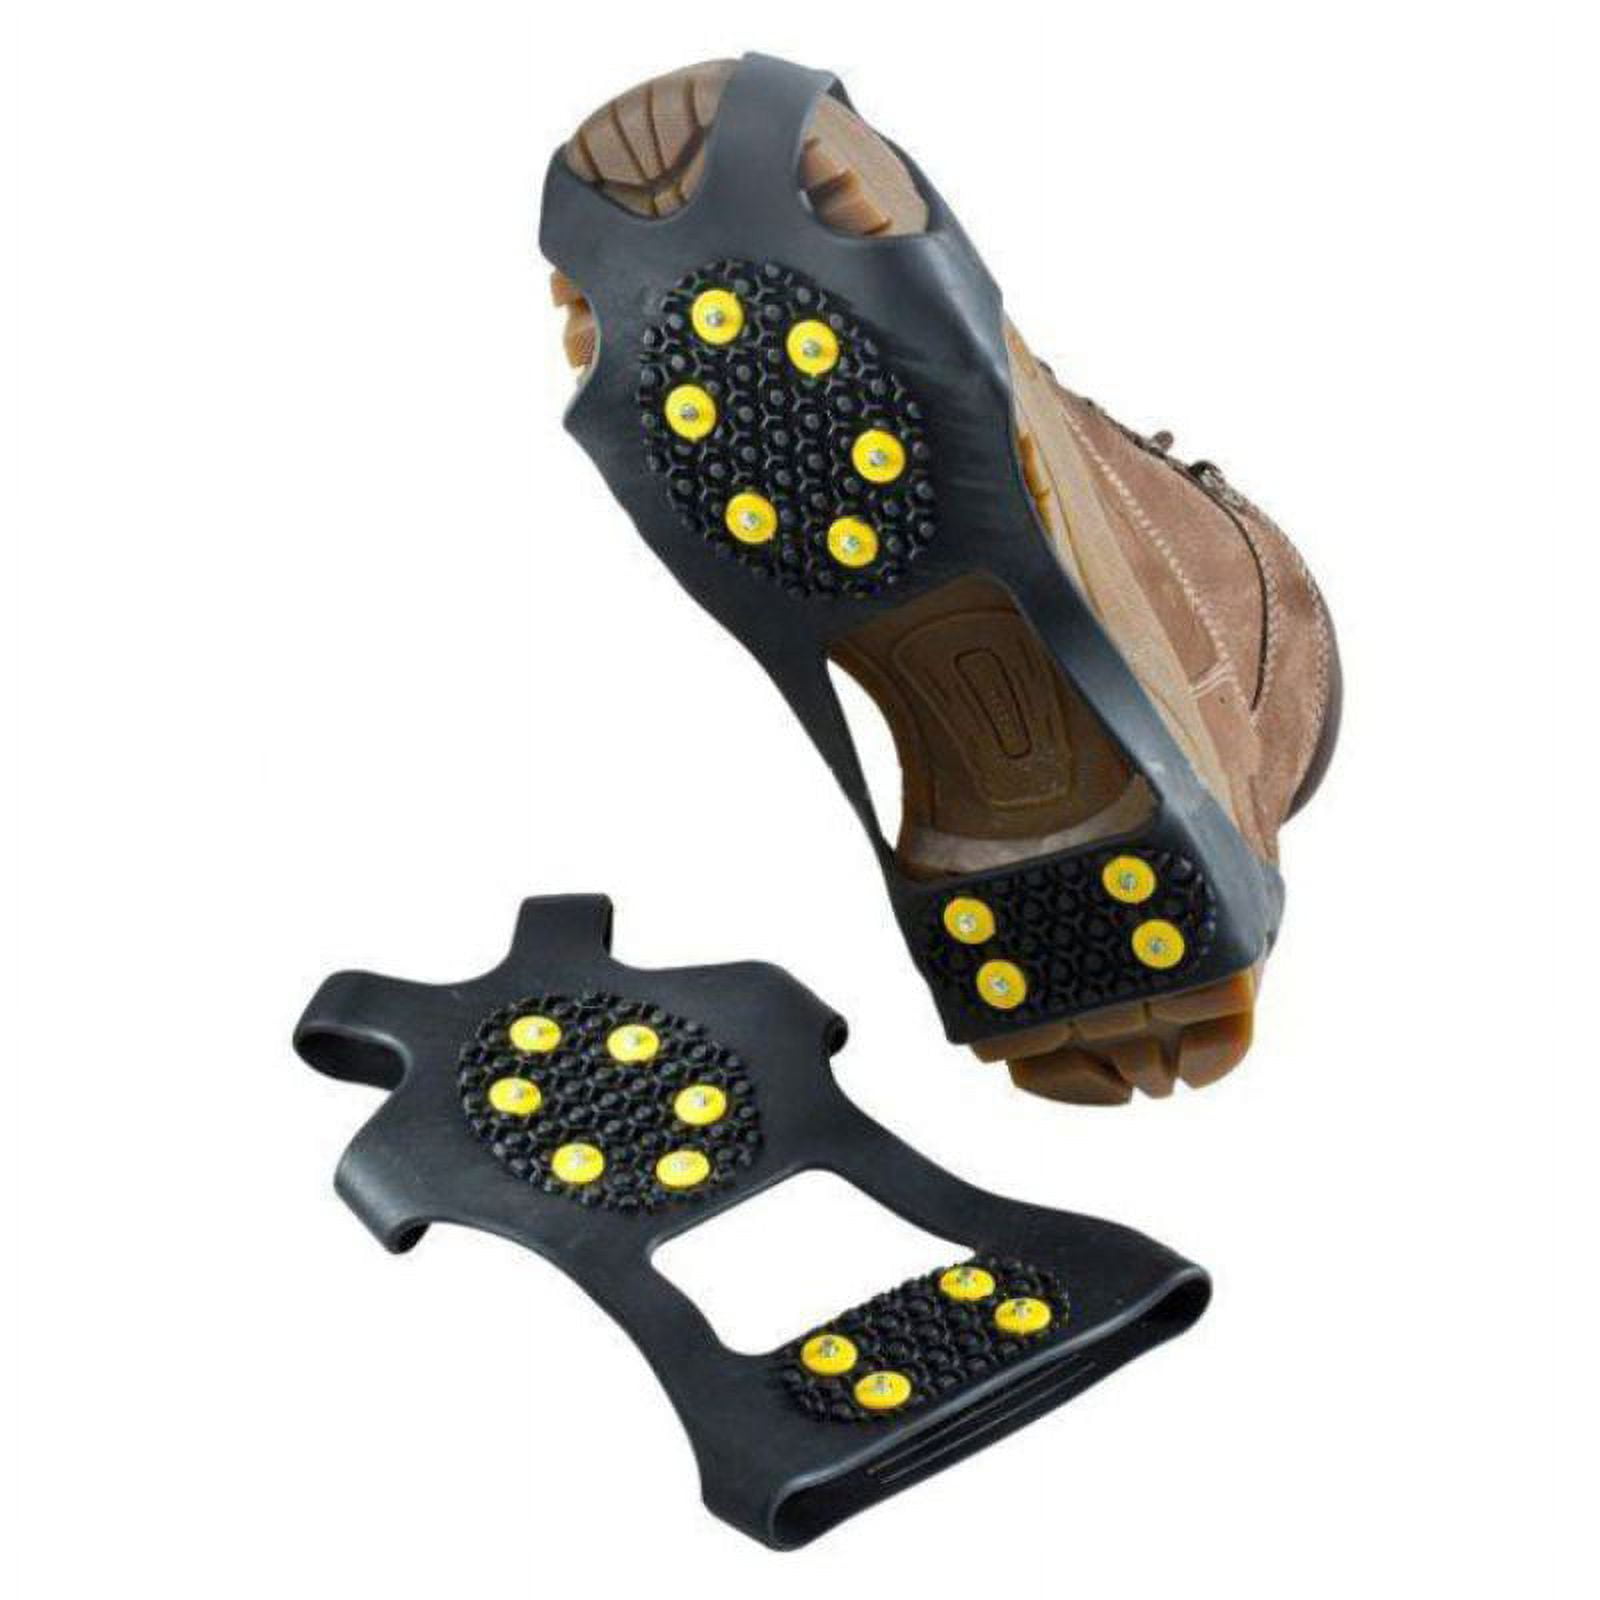 Snow Grippers Ice Cleats - Snow Grips Crampons Anti-Slip Traction